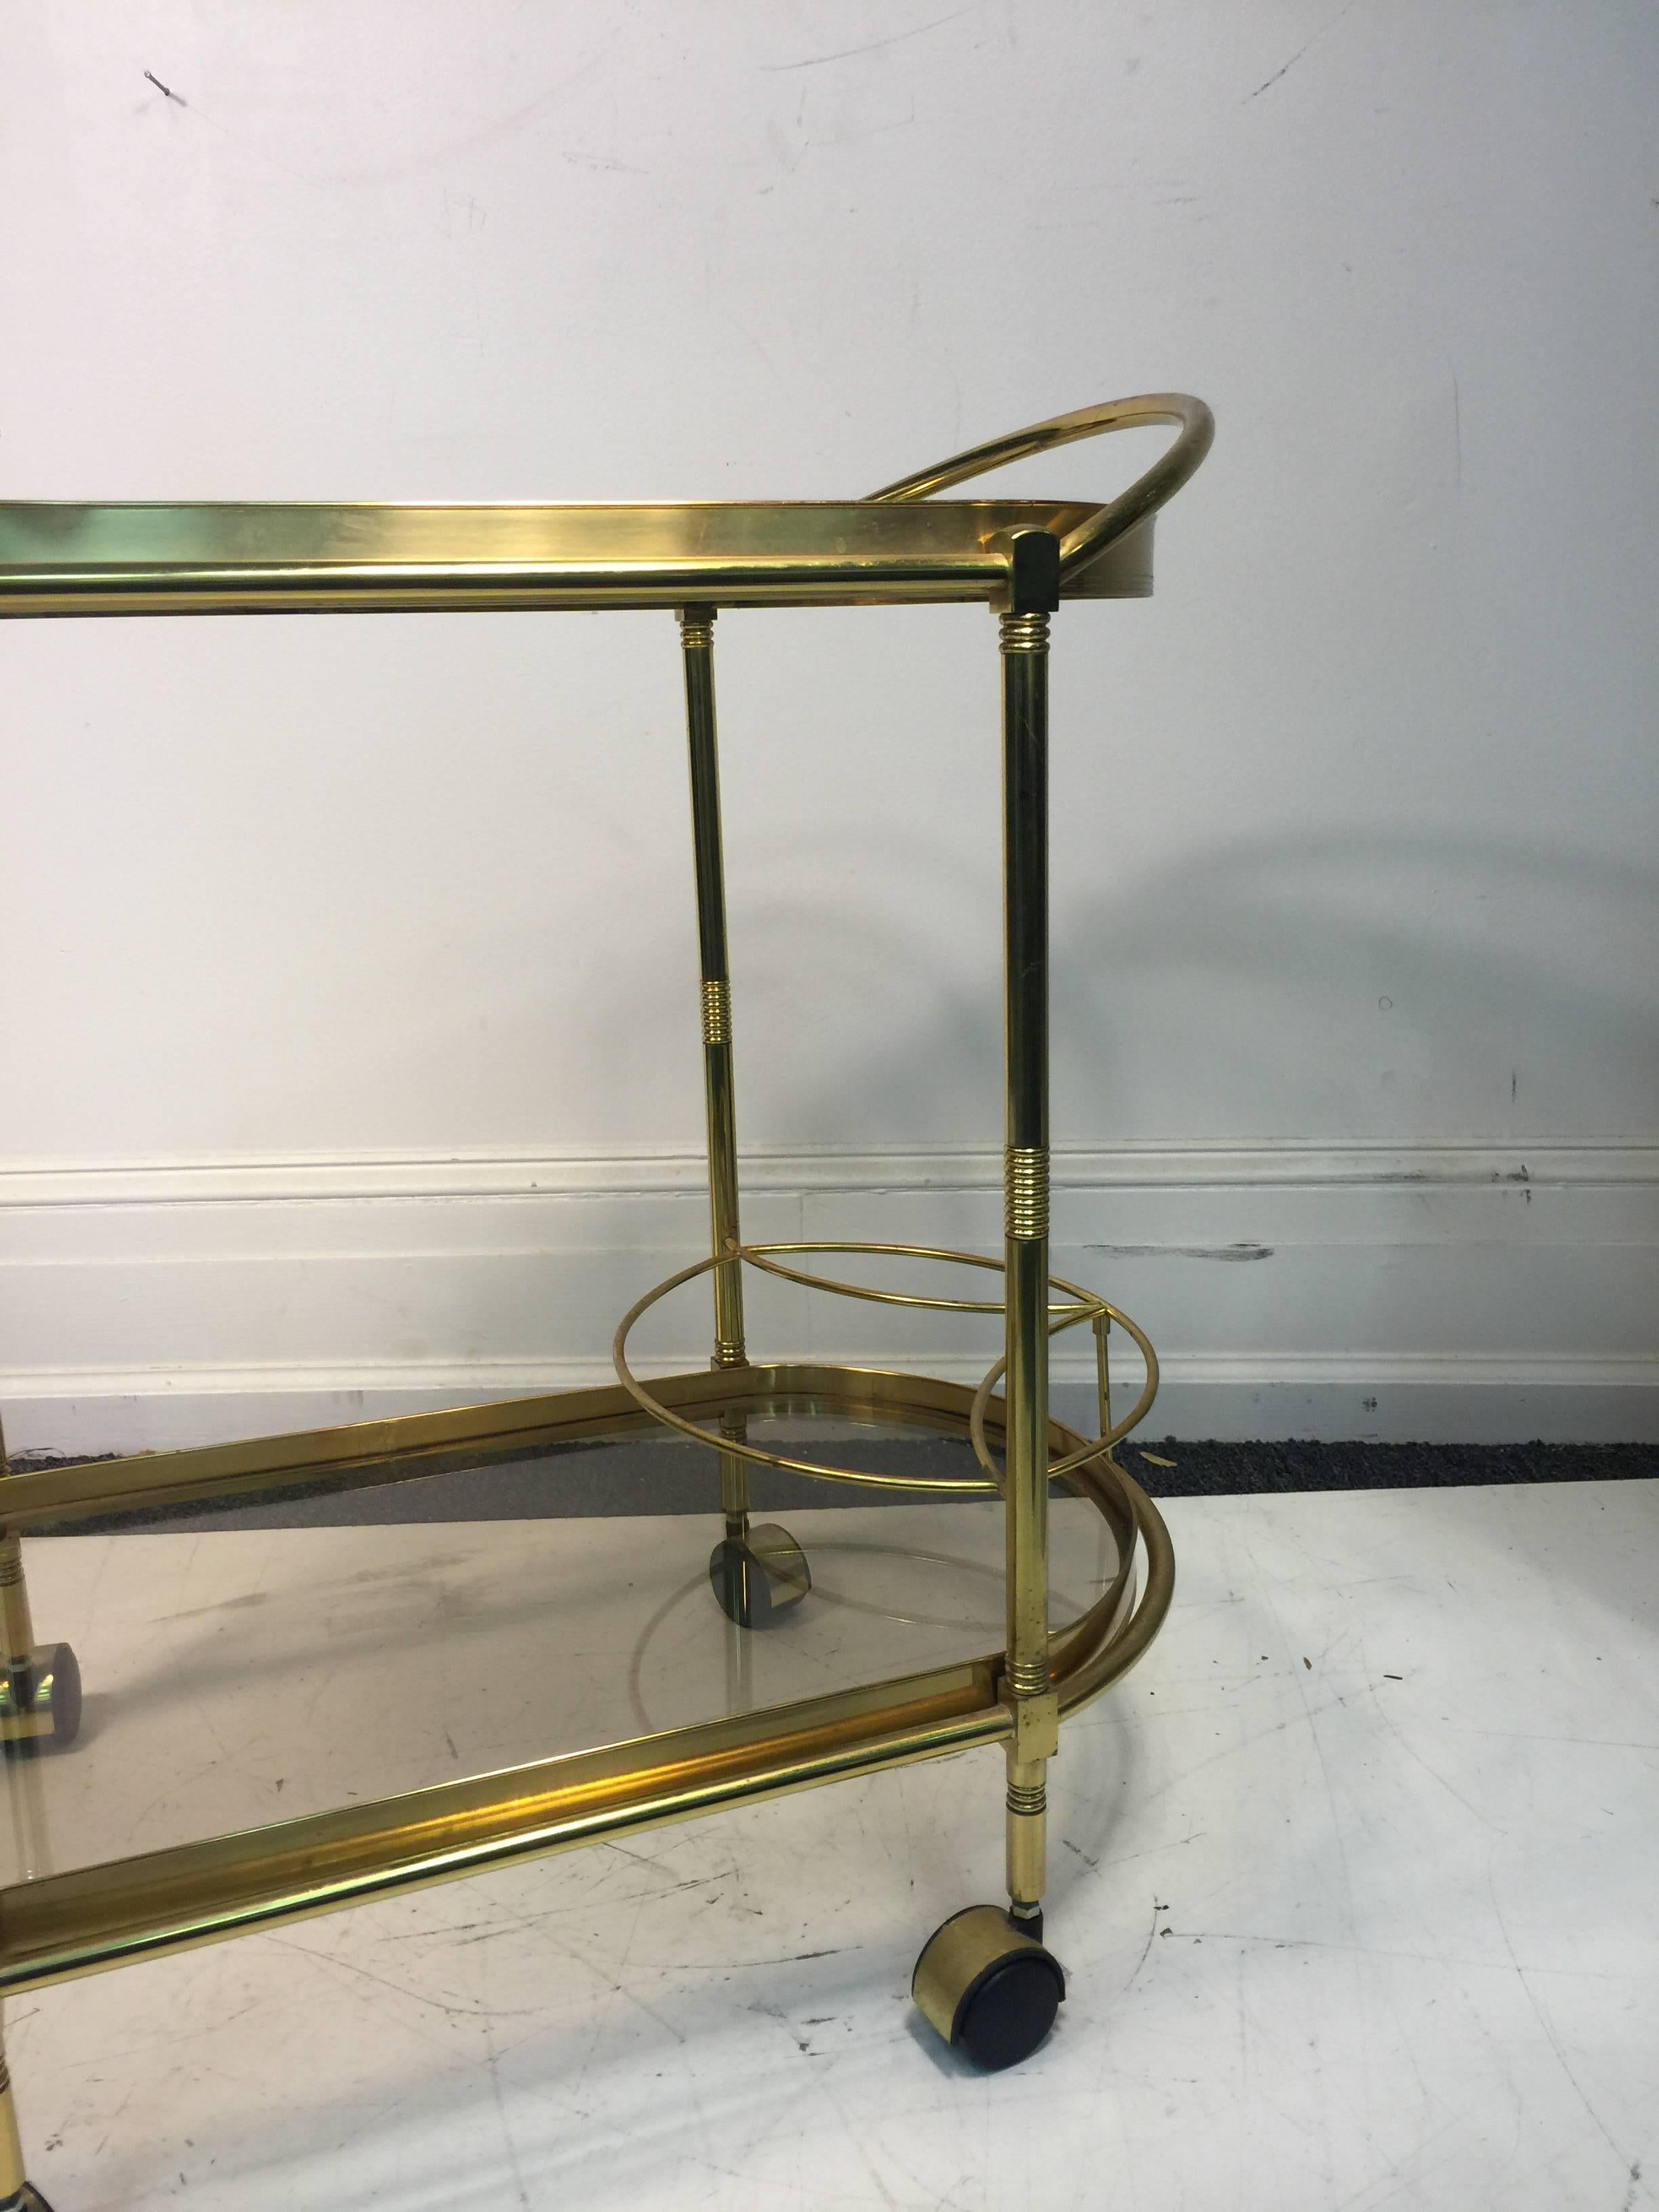 Sensational Oval Shaped Two-Tier Brass Italian Tea or Bar Cart In Good Condition For Sale In Mount Penn, PA